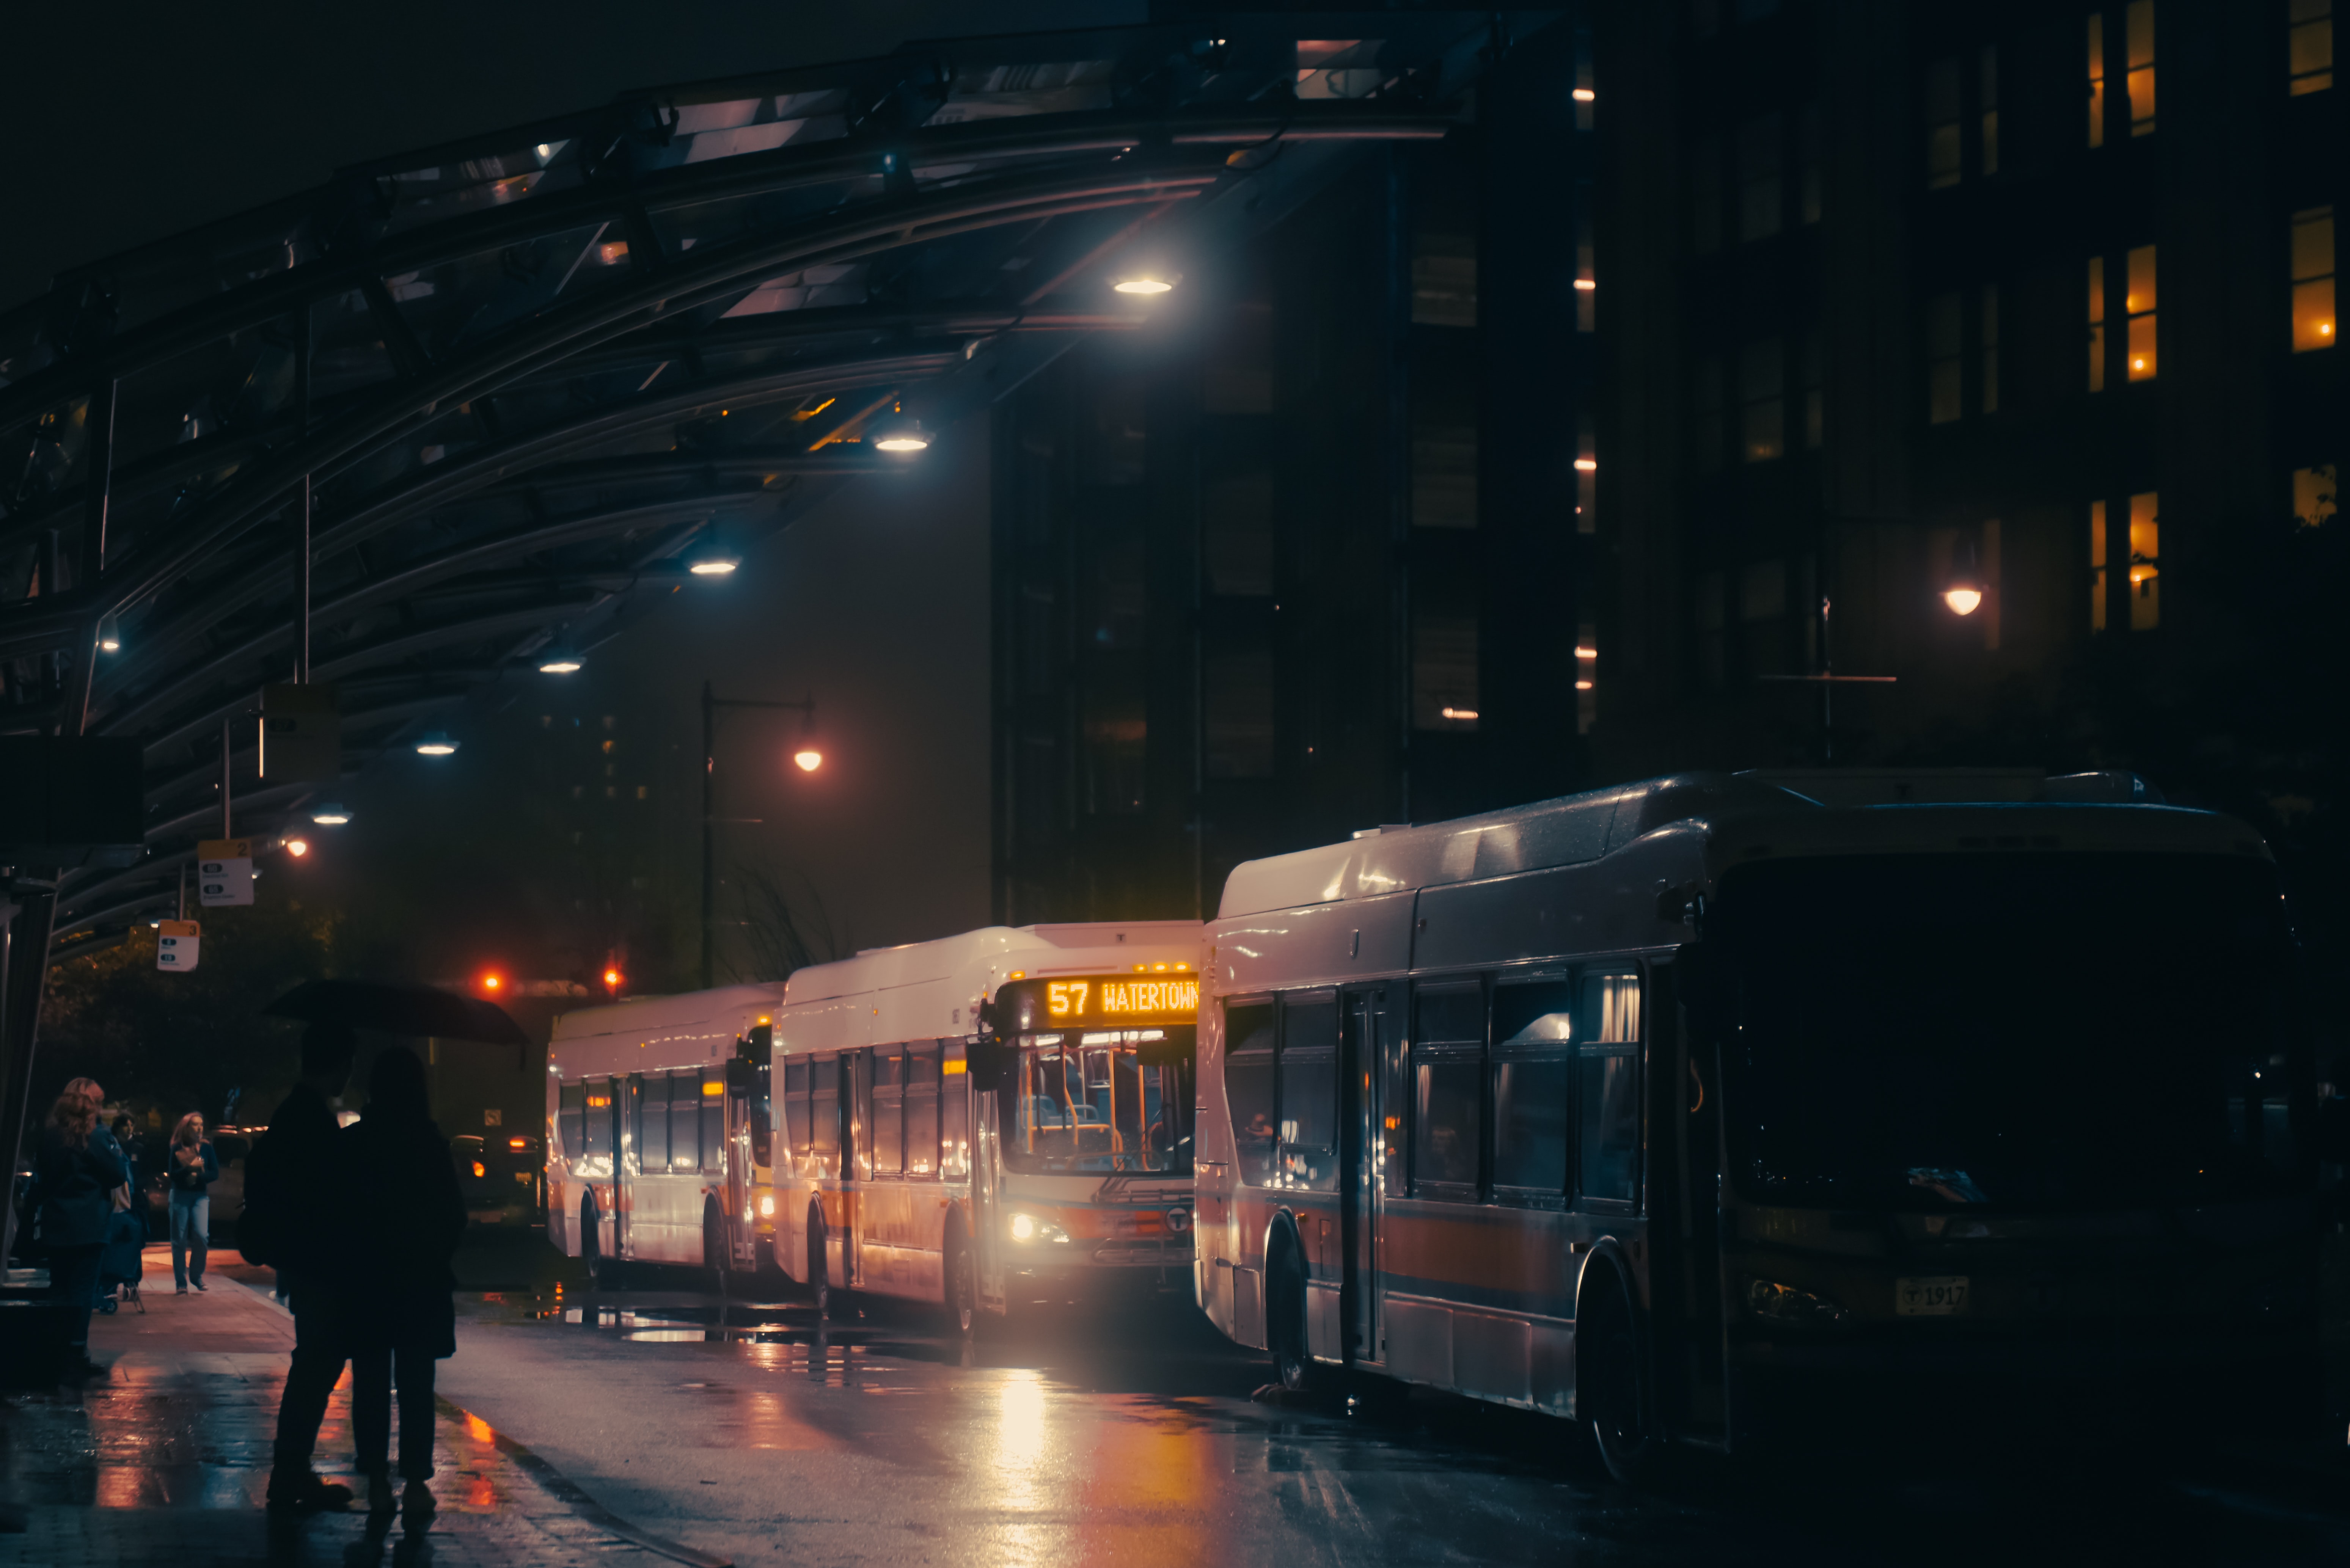 Line of buses at night; image by Andrew Heald, via Unsplash.com.